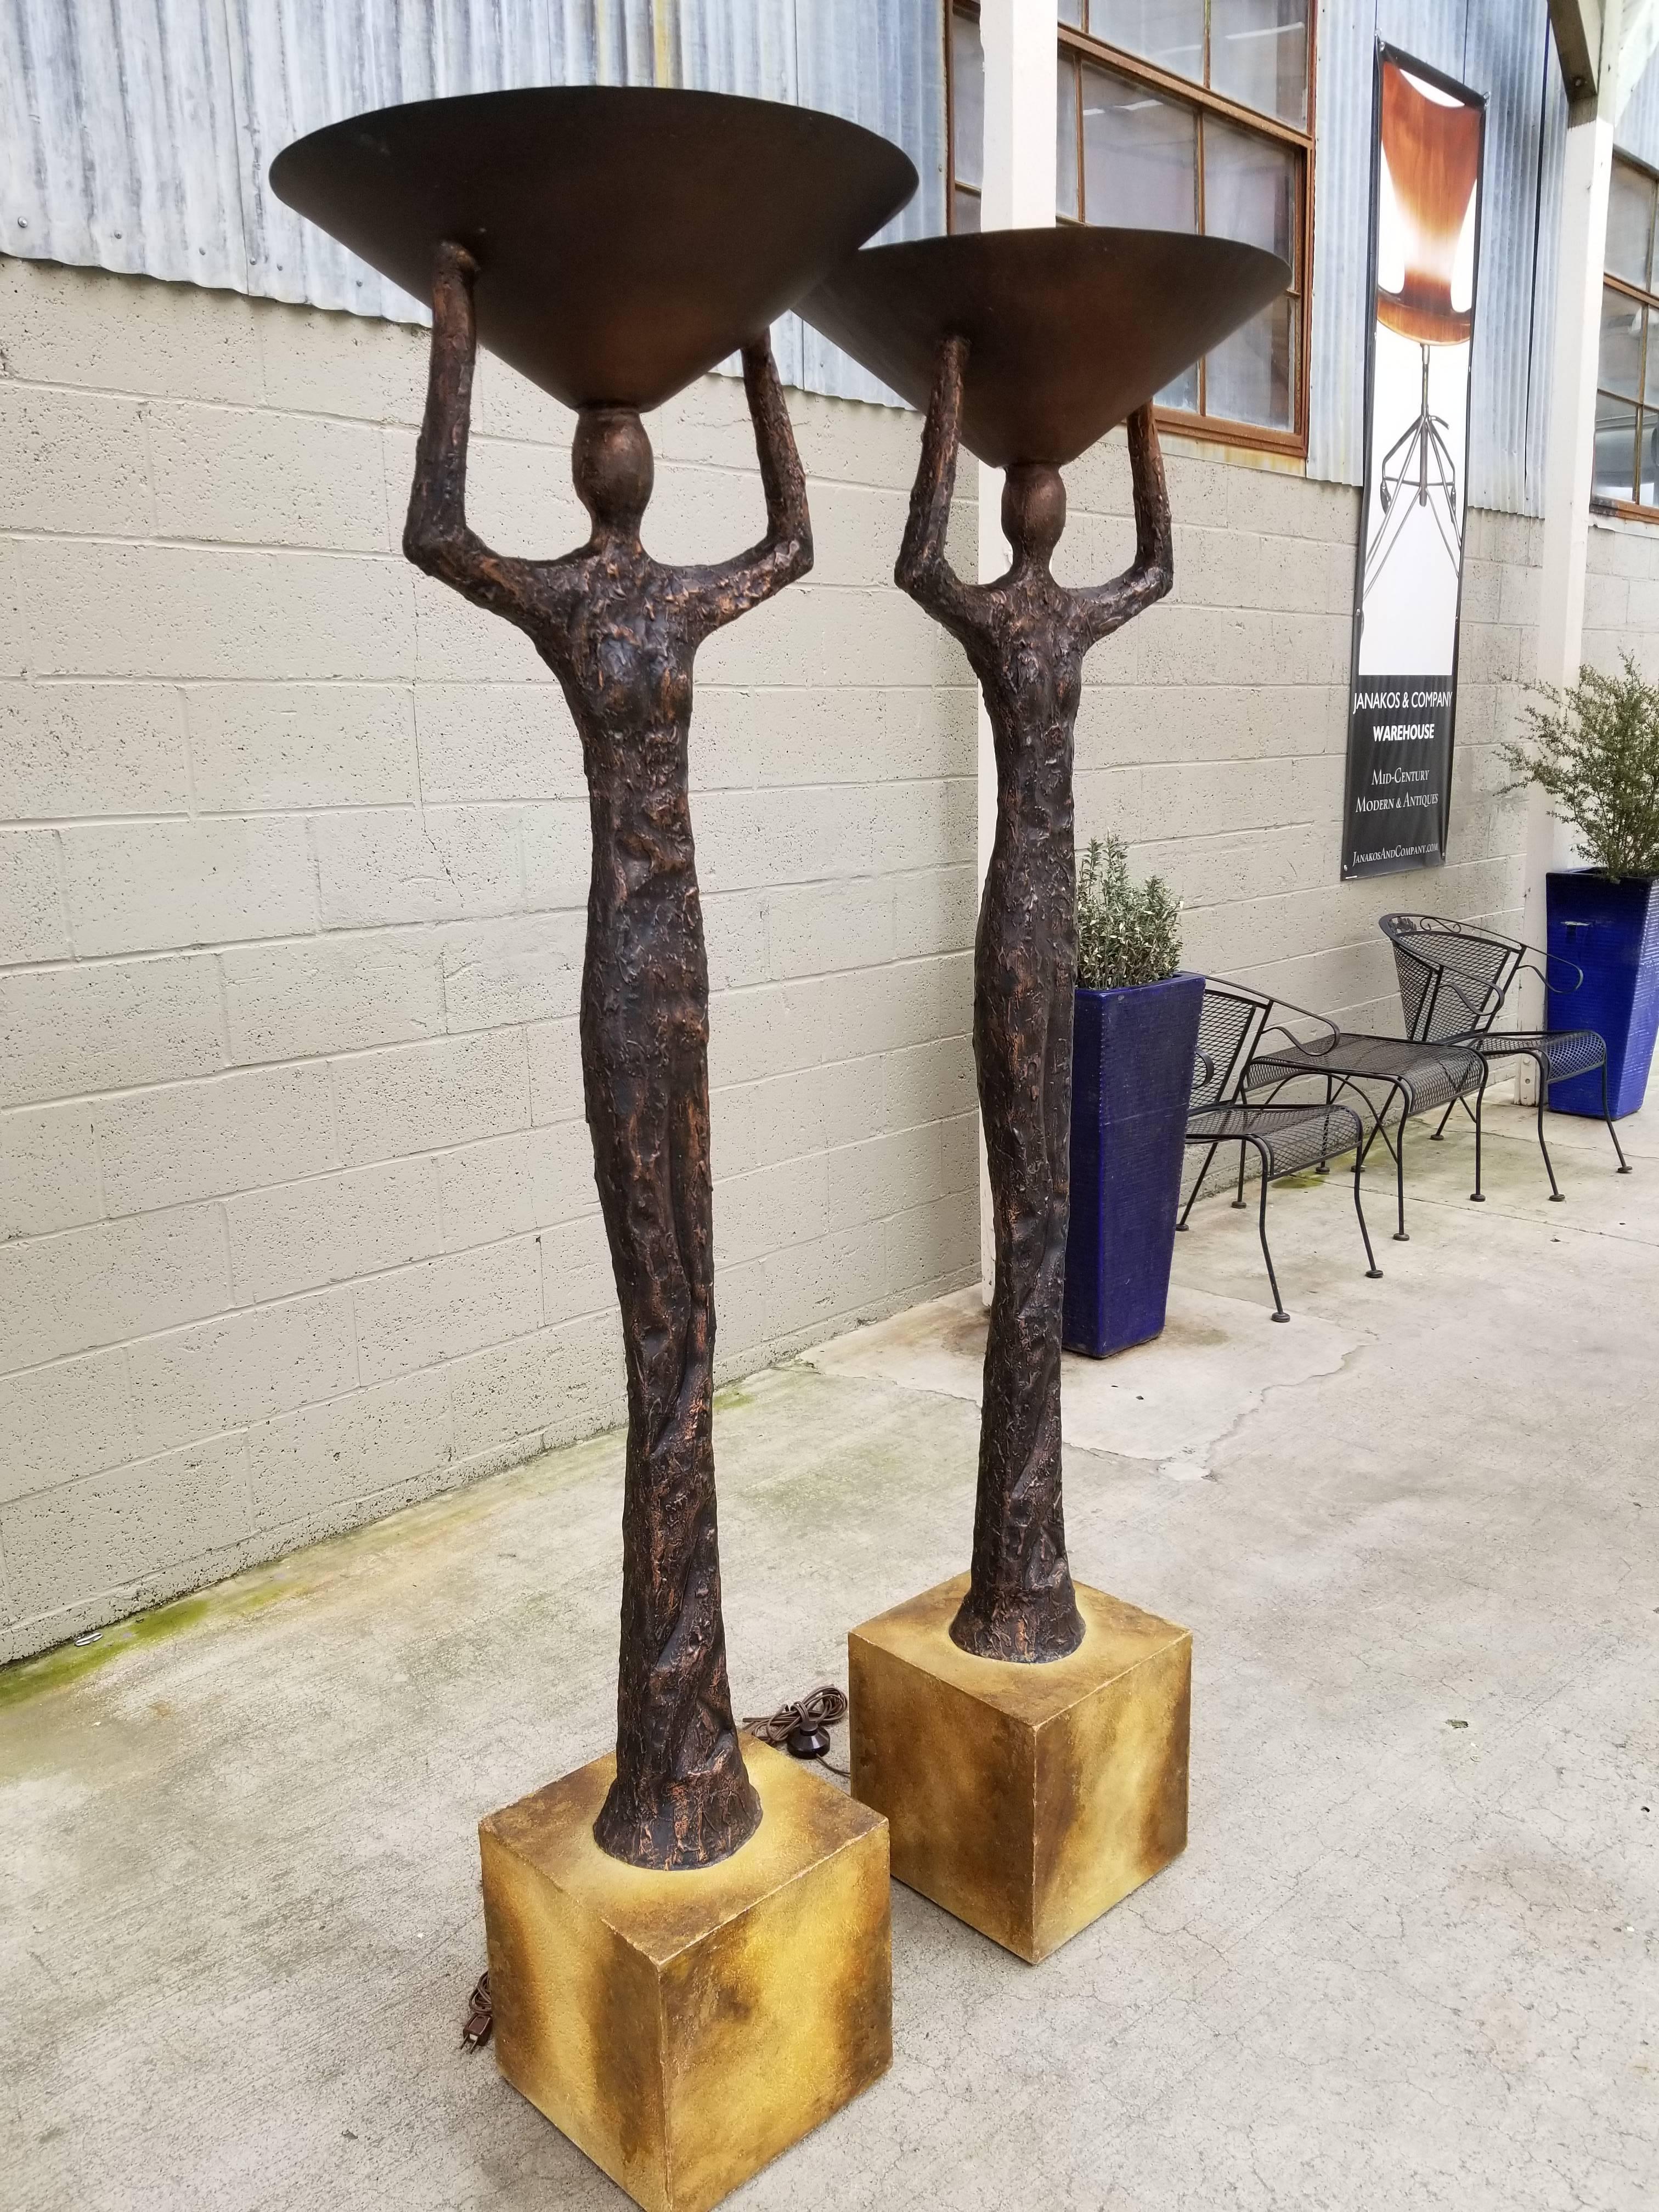 A pair of torchiere floor lamps in the manner of Alberto Giacometti. Heavily textured finish resembling patinated bronze. Wood bases with steel weights. Steel cone shades. Figures are a hallow fiberglass with applied resin for texture. Impressive